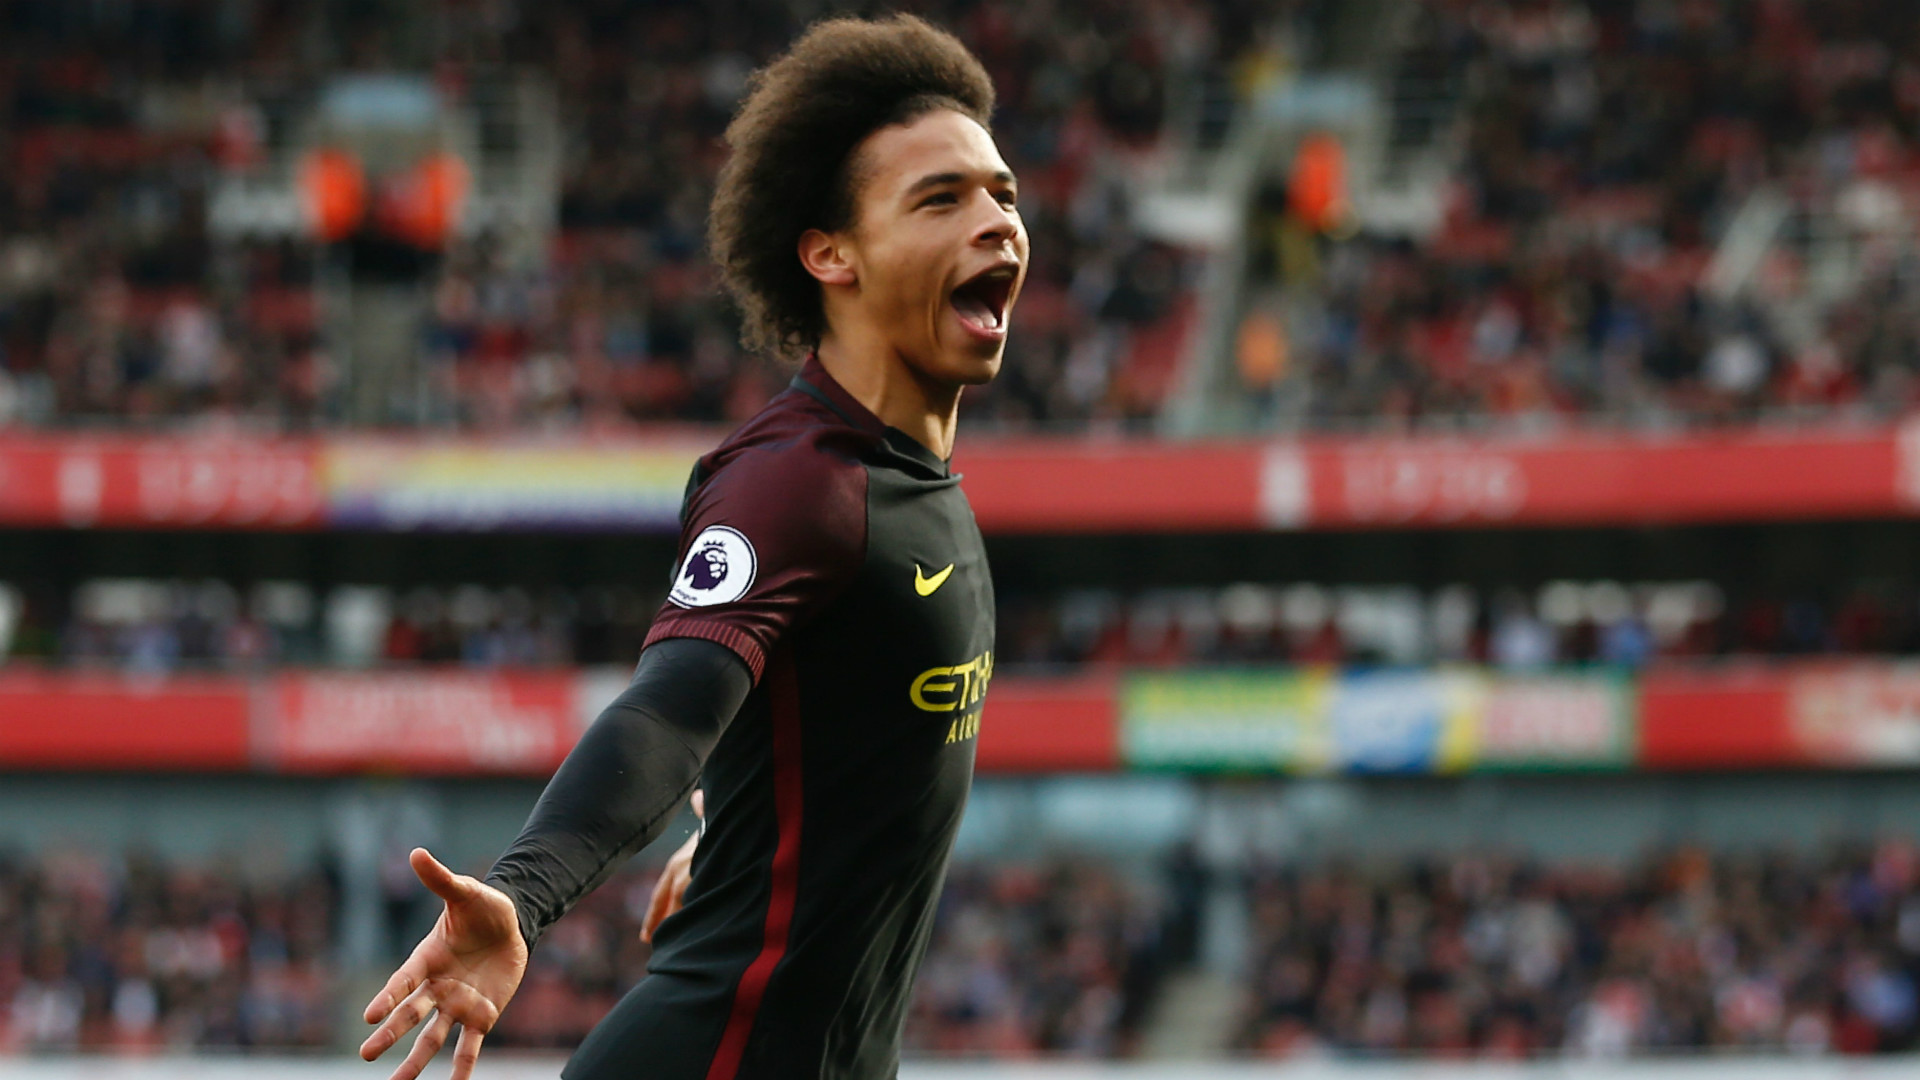 FA Cup: Manchester City's Leroy Sane targeting Arsenal | Goal.com1920 x 1080